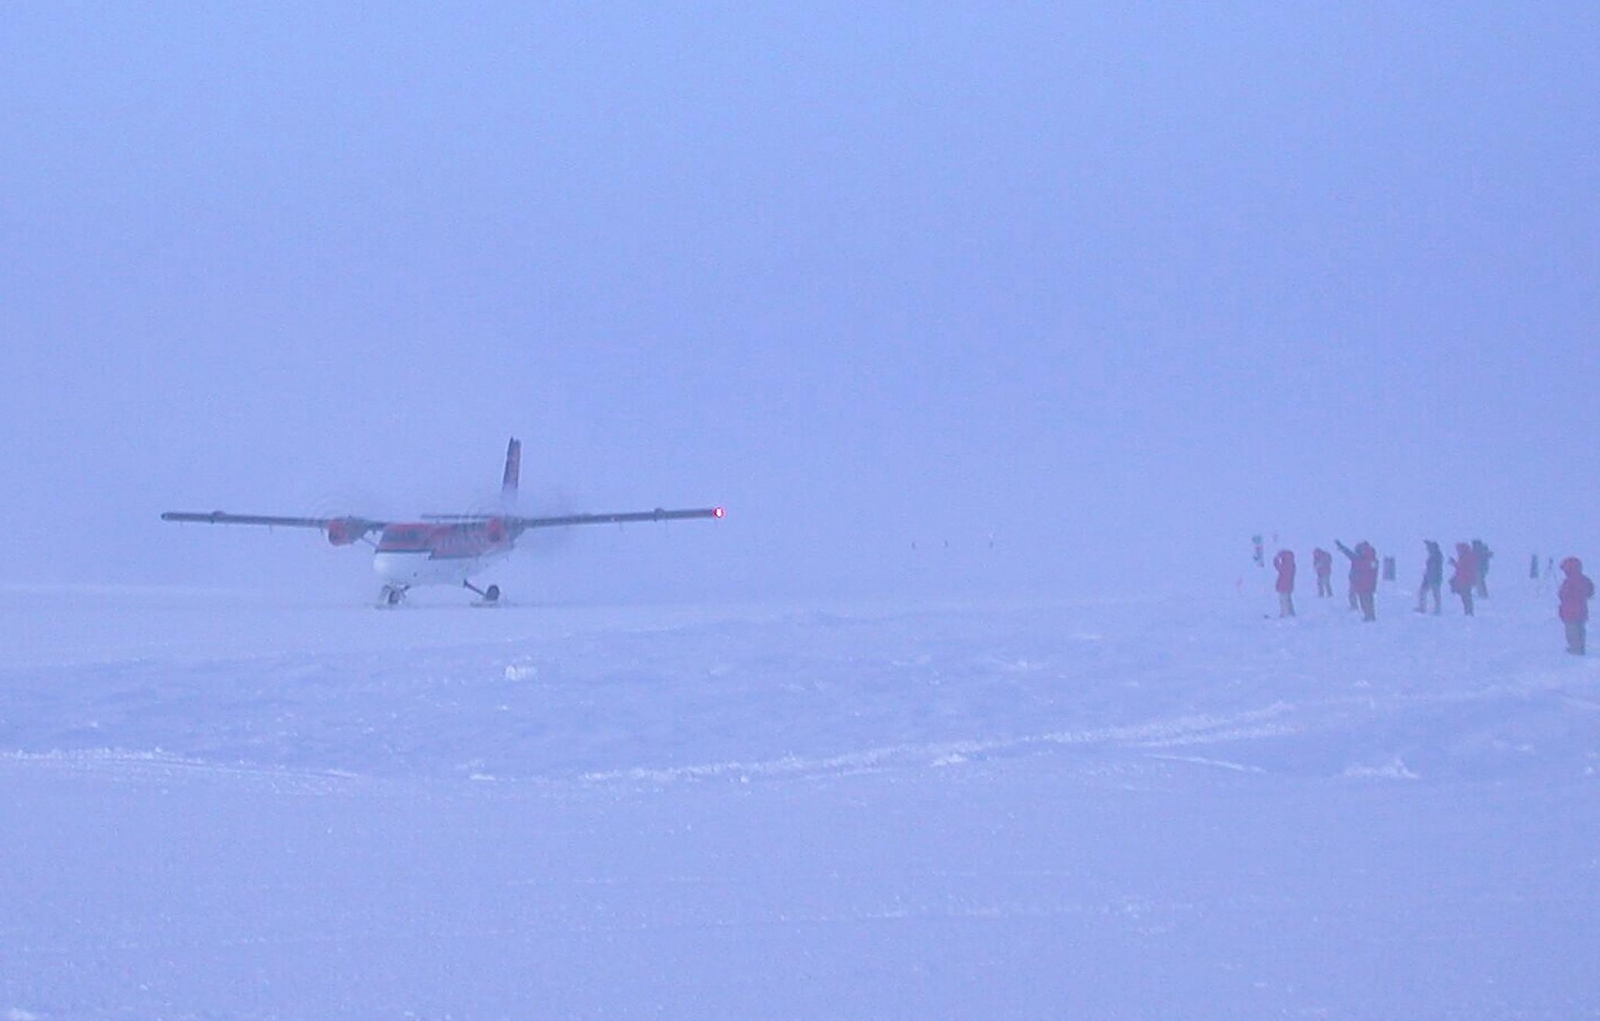 Candian Plane lands at South Pole